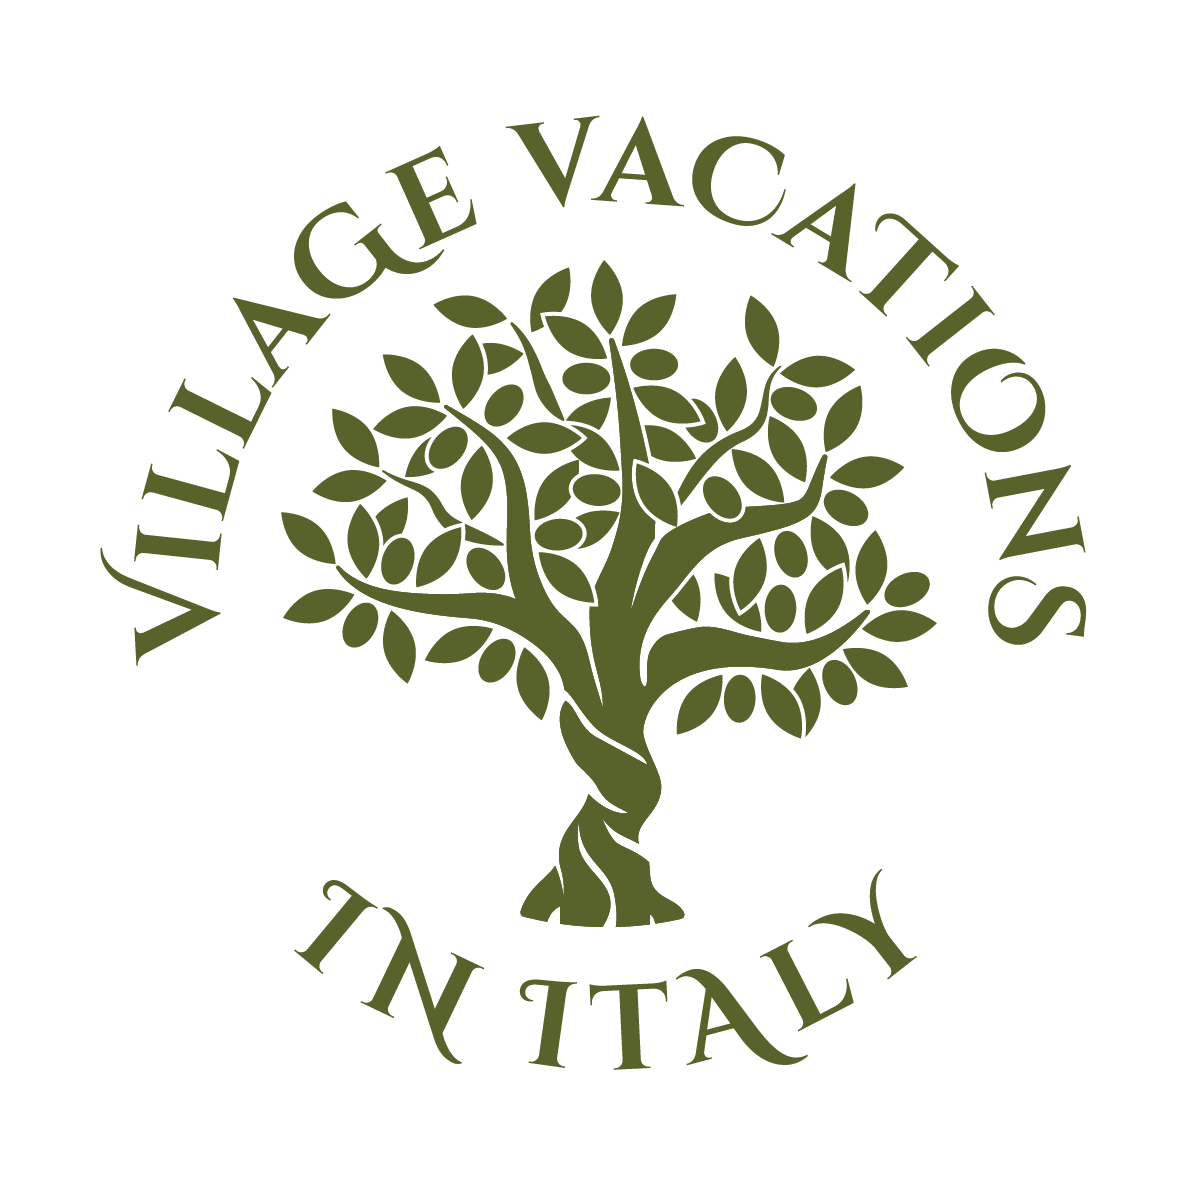 Village Vacations In Italy